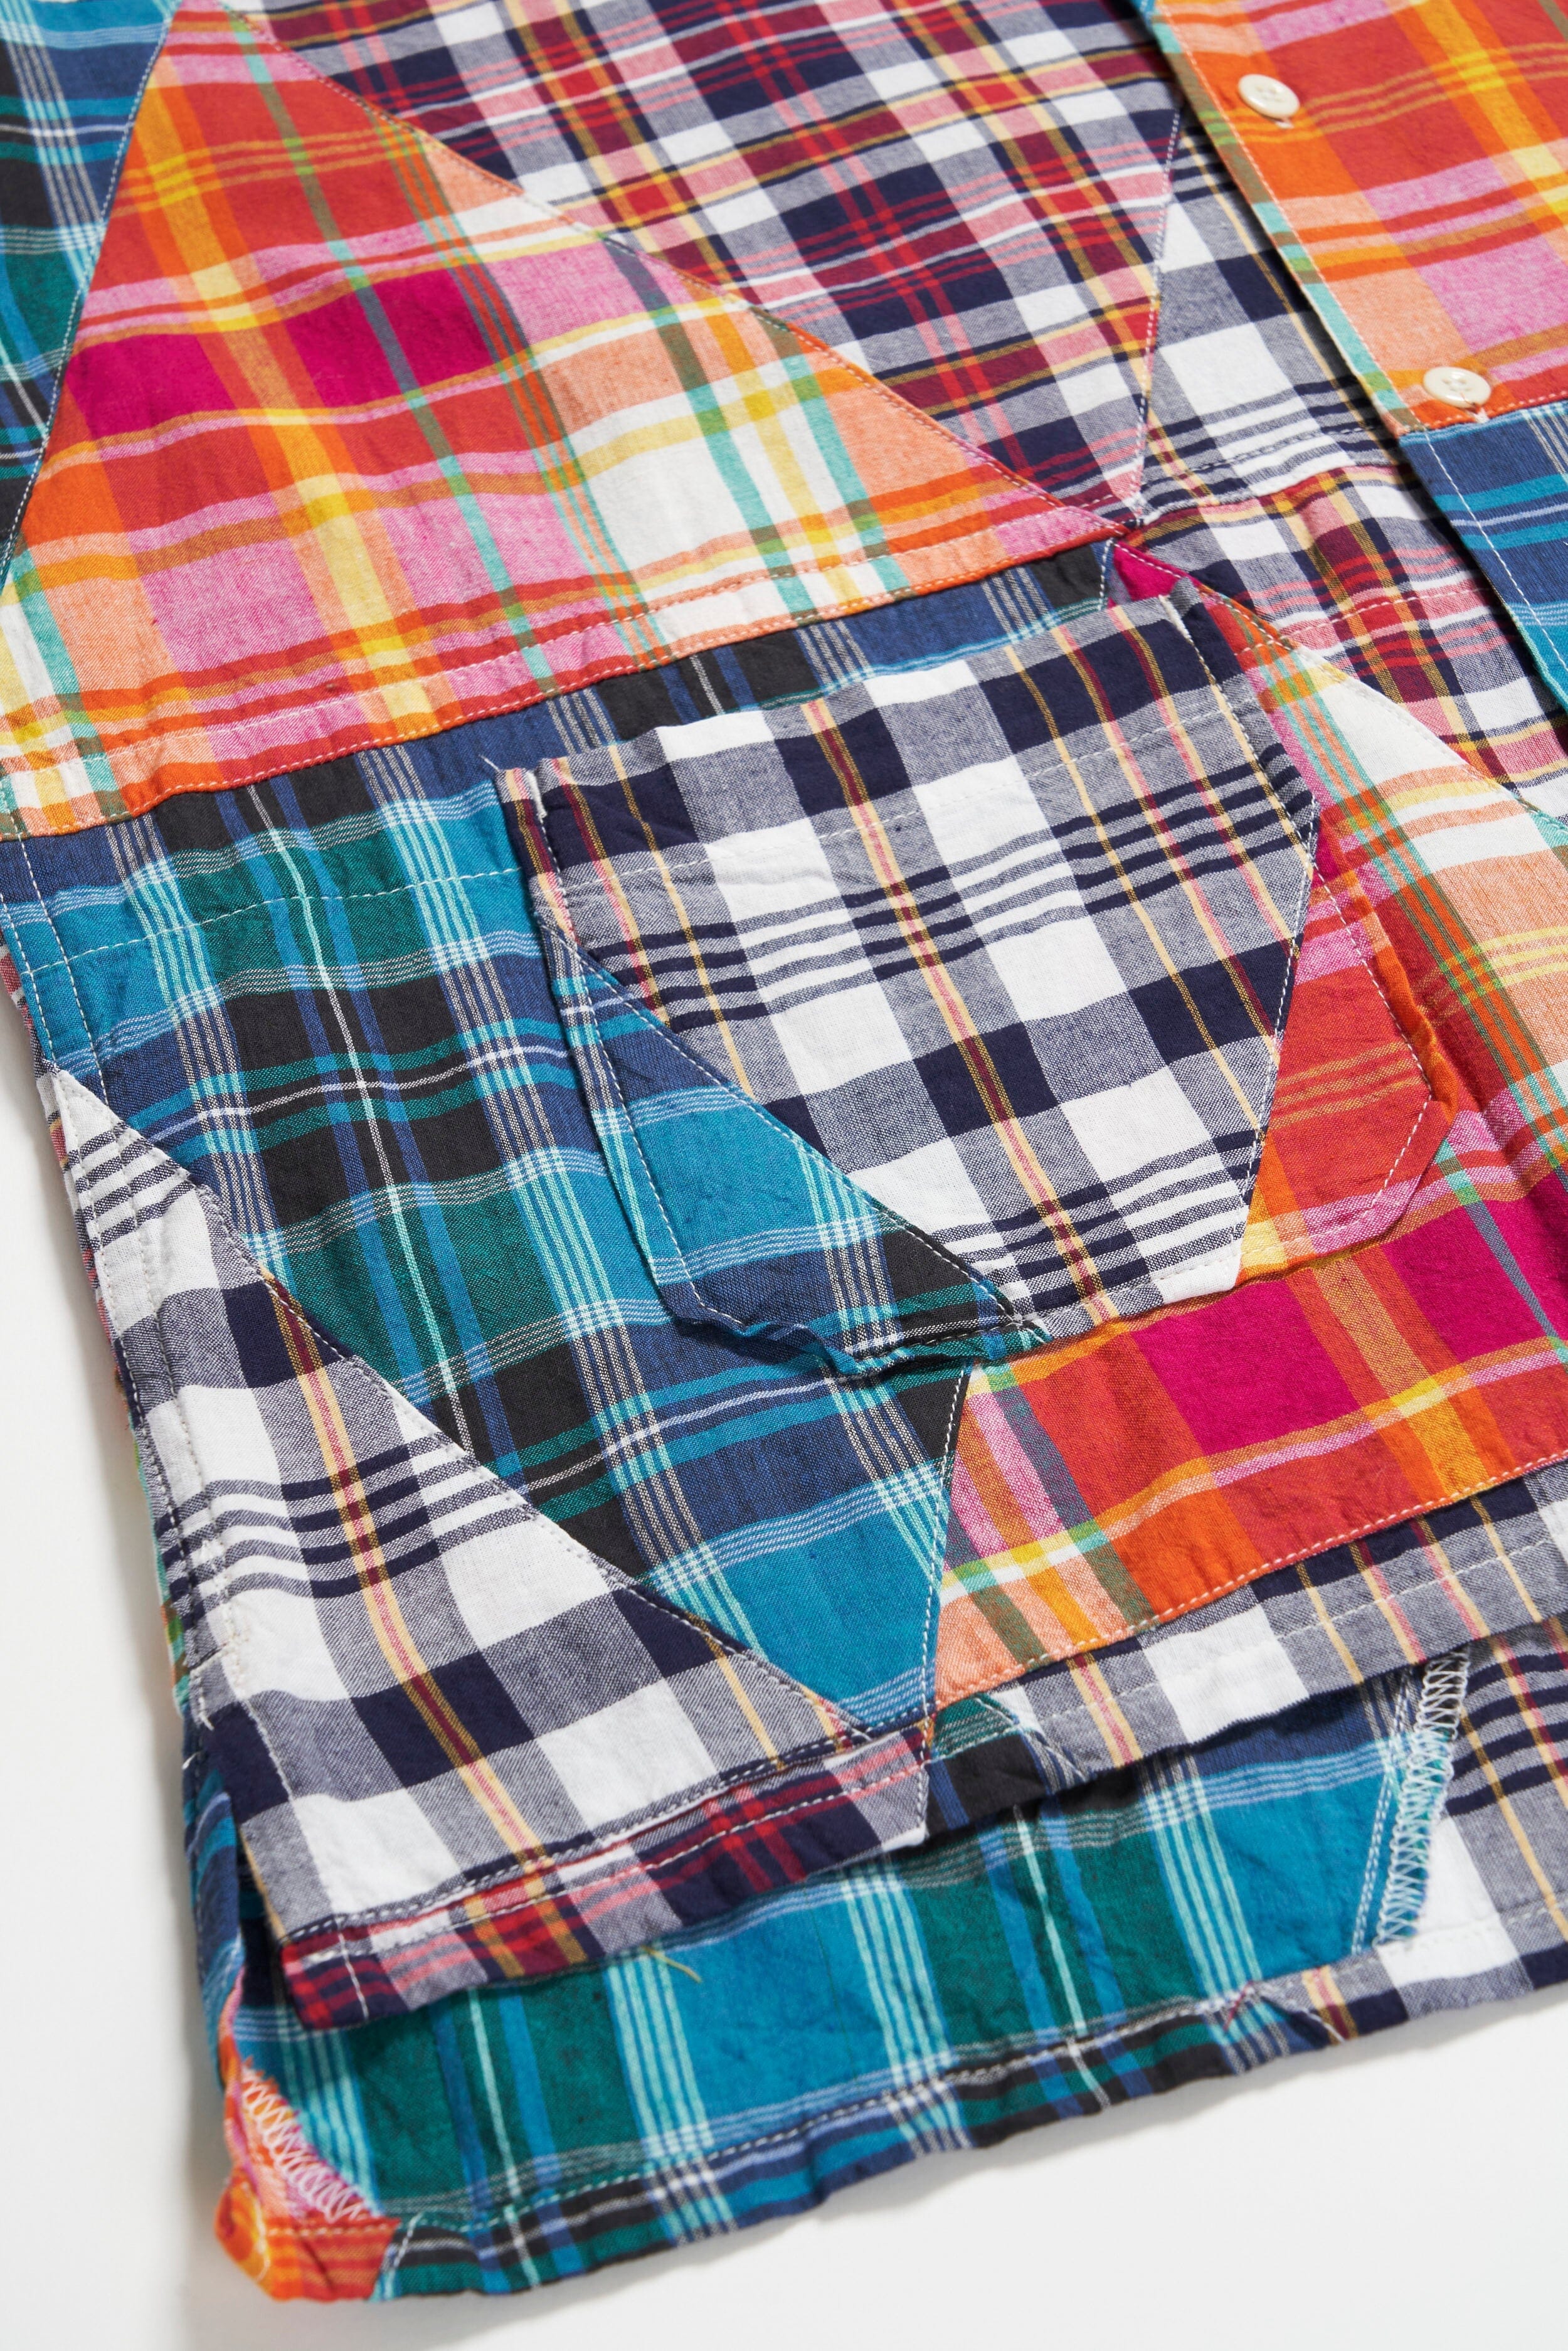 Engineered Garments - Camp Shirt - Multi Color Triangle Patchwork Madras - City Workshop Men's Supply Co.